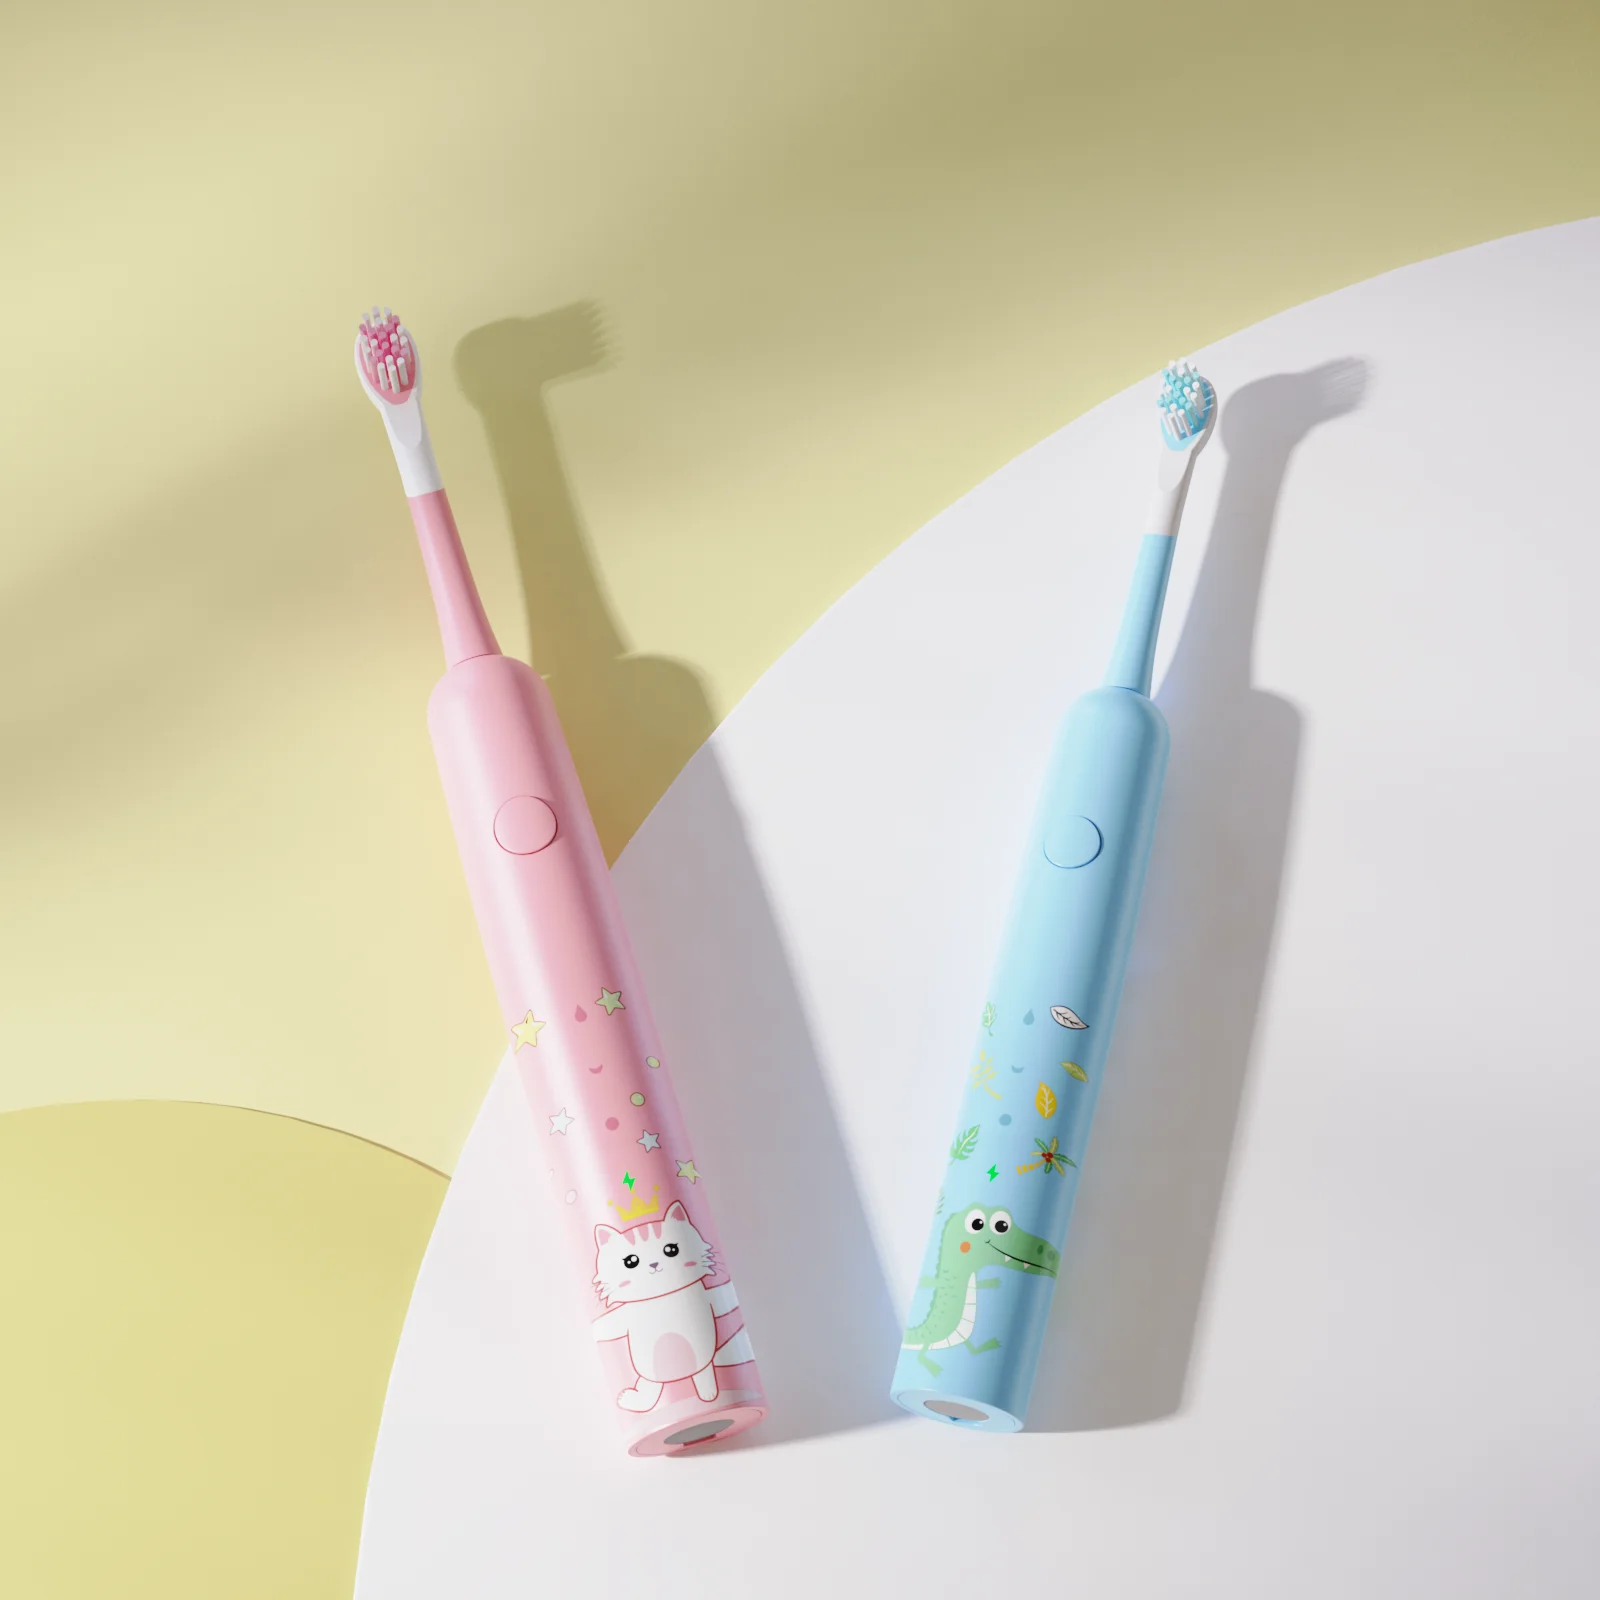 

Sonic electric tooth soft bristle smart brush head children's tooth children's electric toothbrush kids toobrush electric